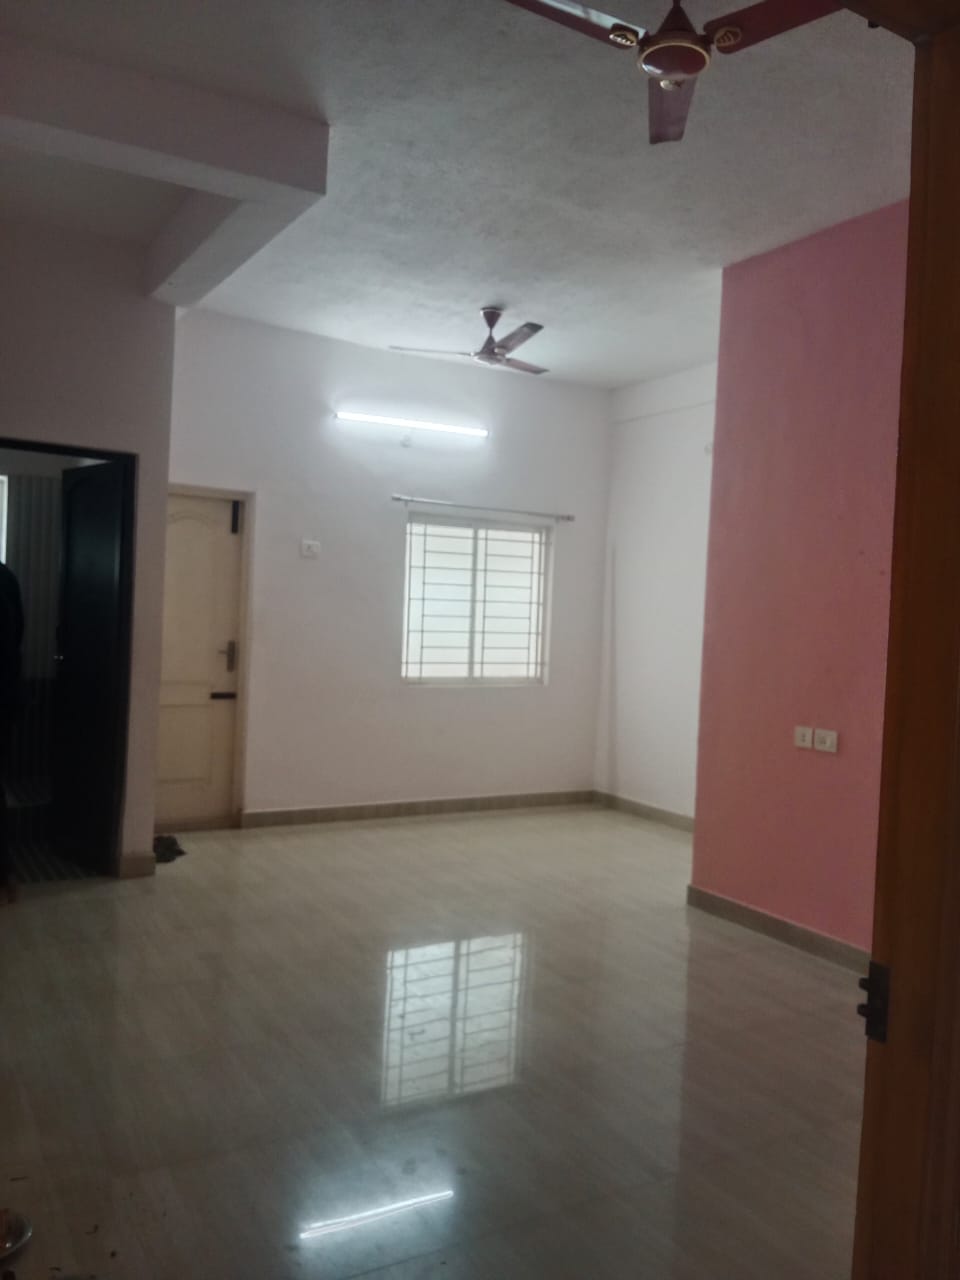 2 BHK Residential Apartment for Lease Only in Karapakkam